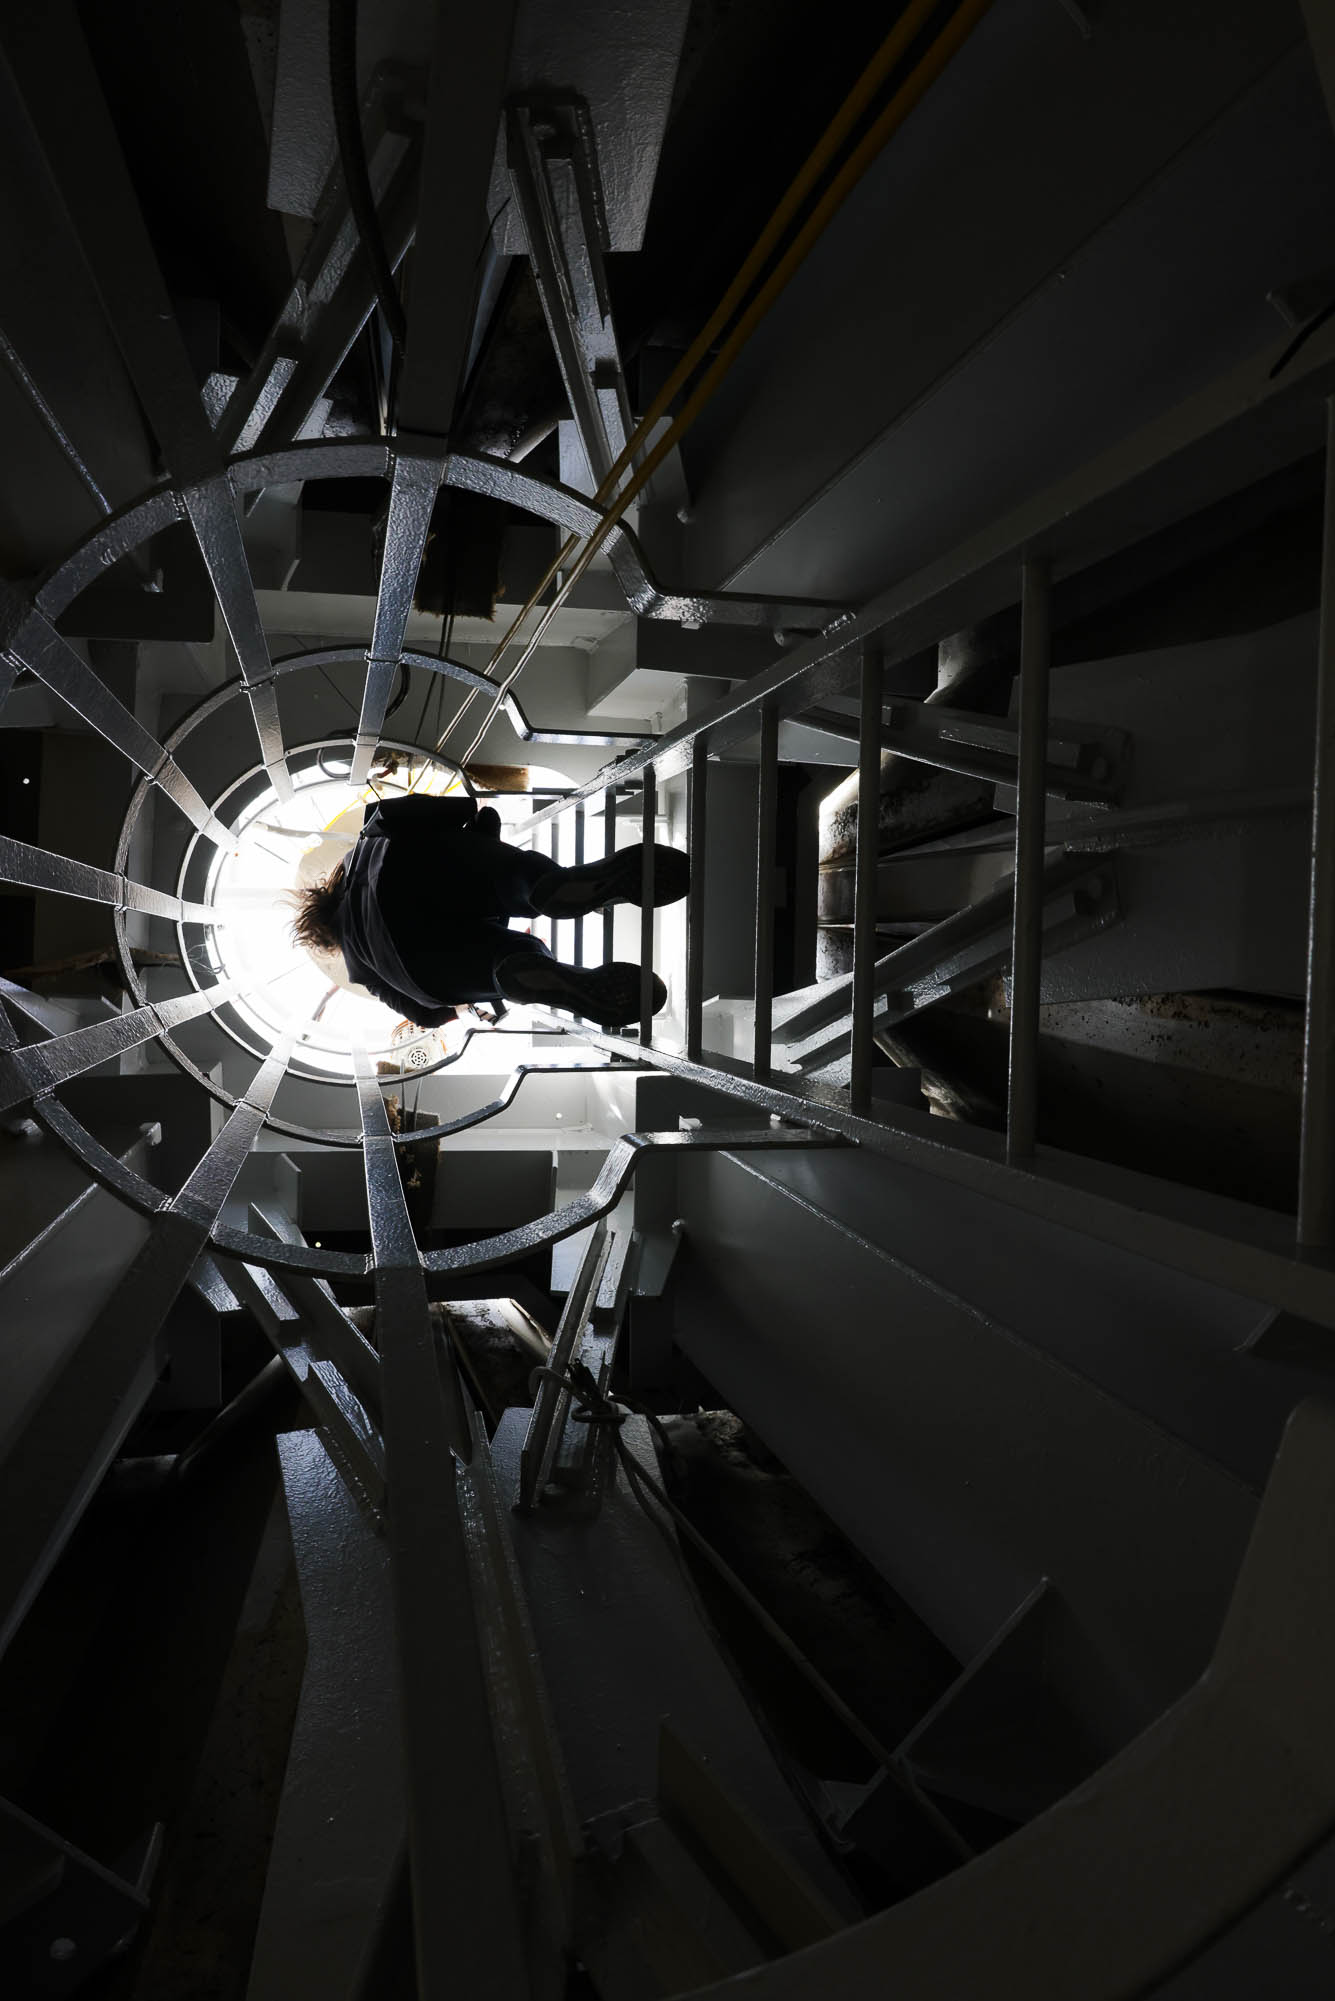 A person ascends a dark, industrial spiral staircase towards a bright light at the top.